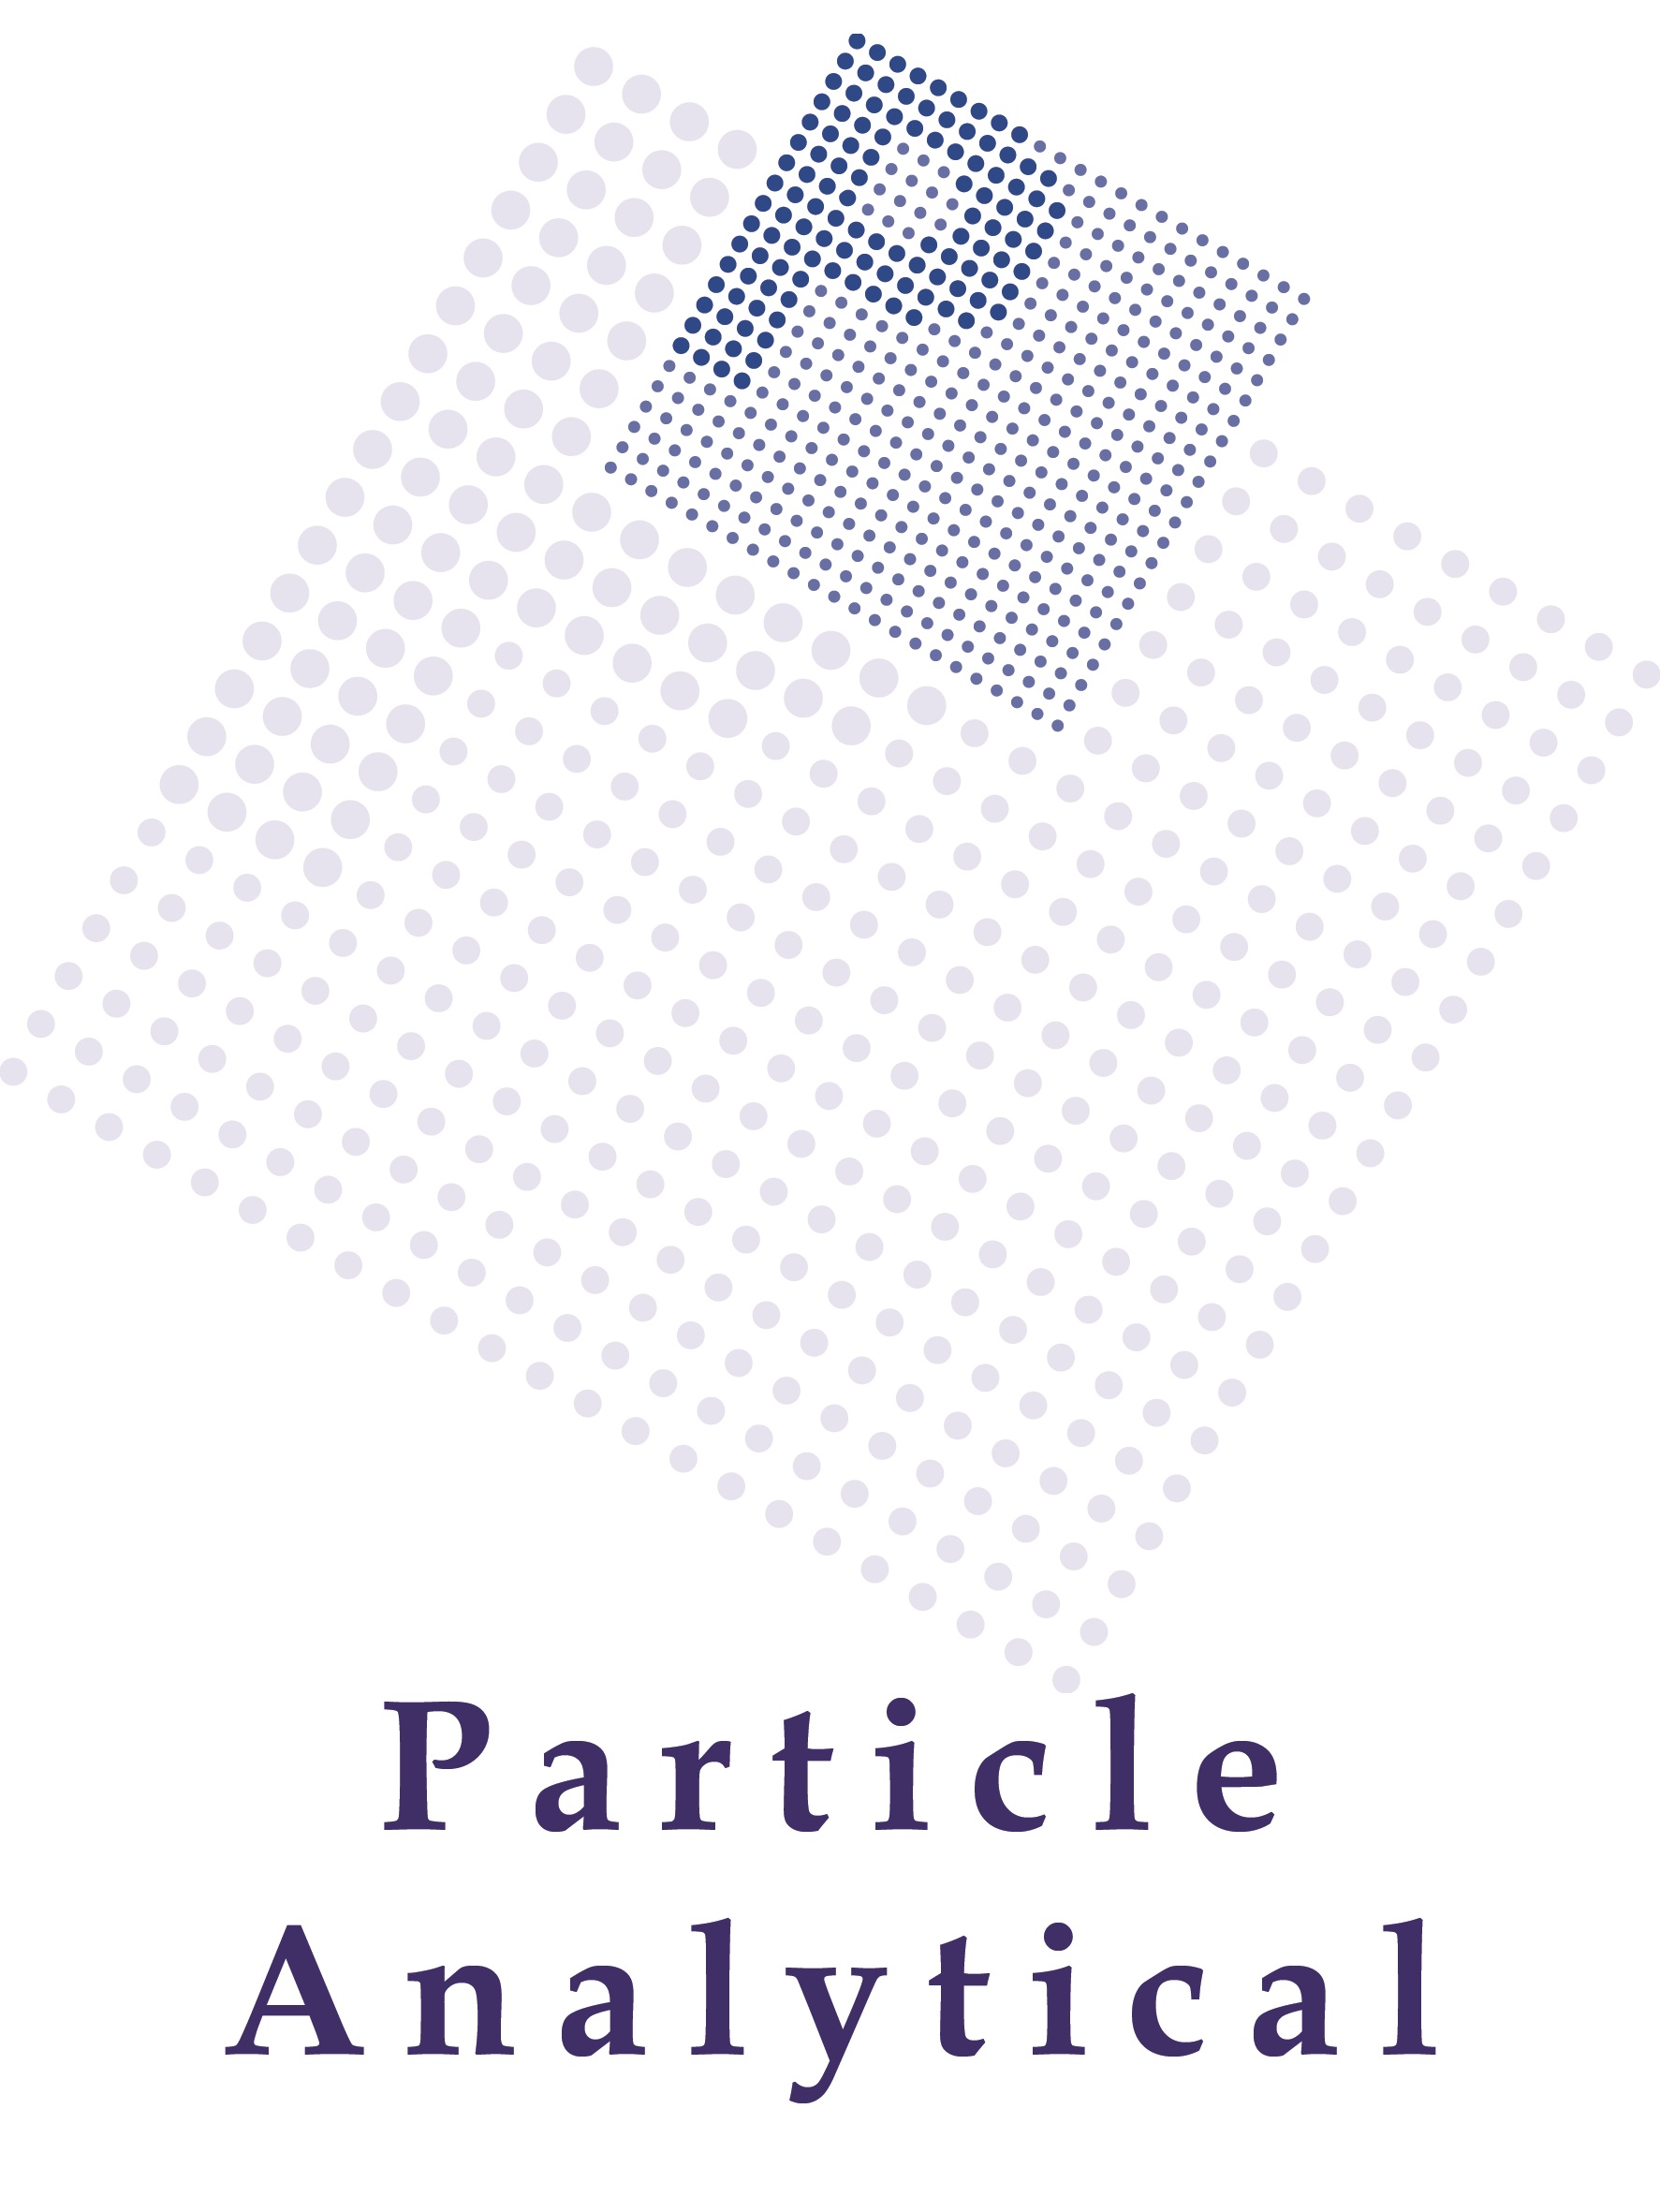 Particle Analytical responds to Covid-19 pandemic